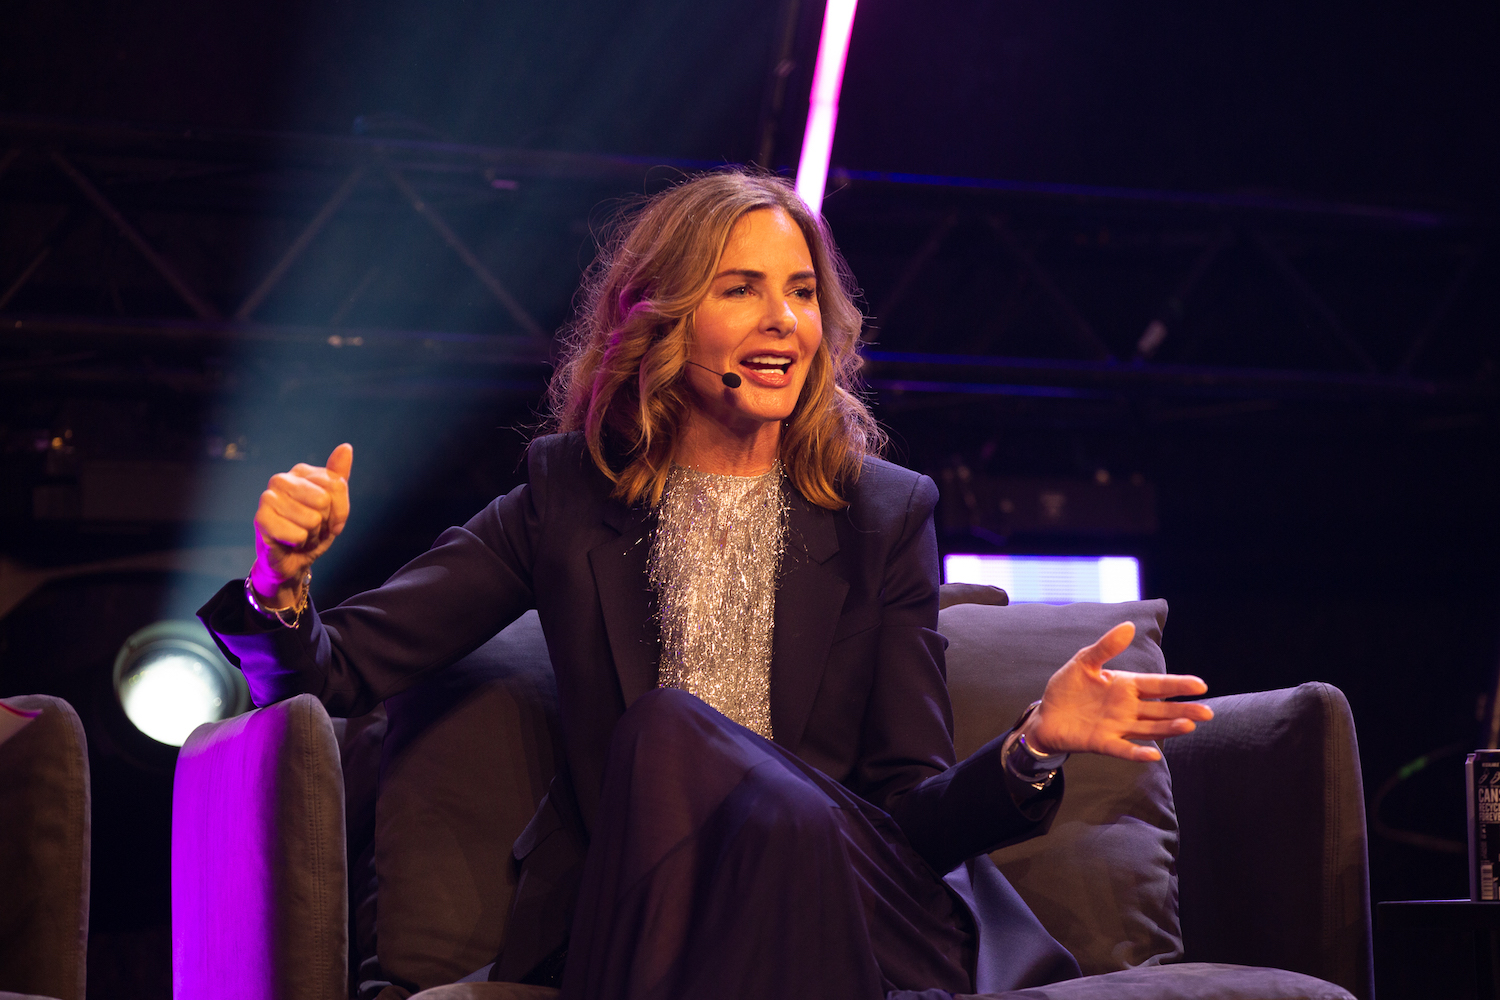 Trinny Woodall on the main stage at the Sifted Summit